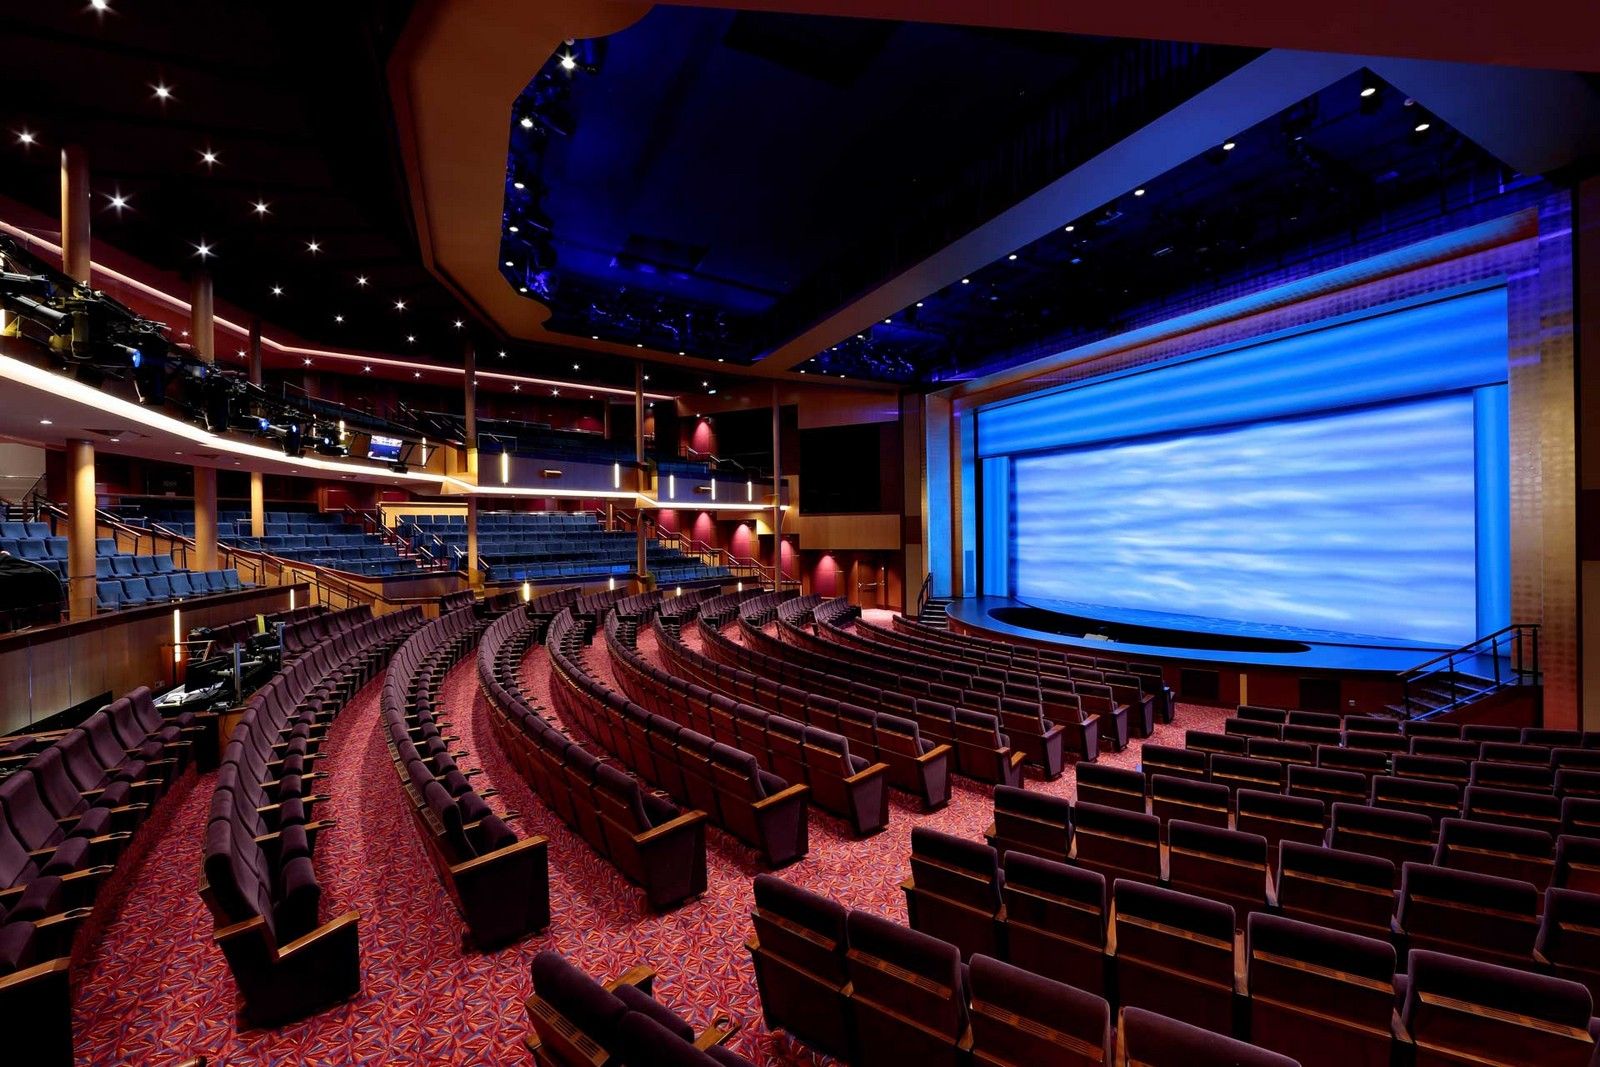 Movie theatre in a Royal Caribbean cruise ship